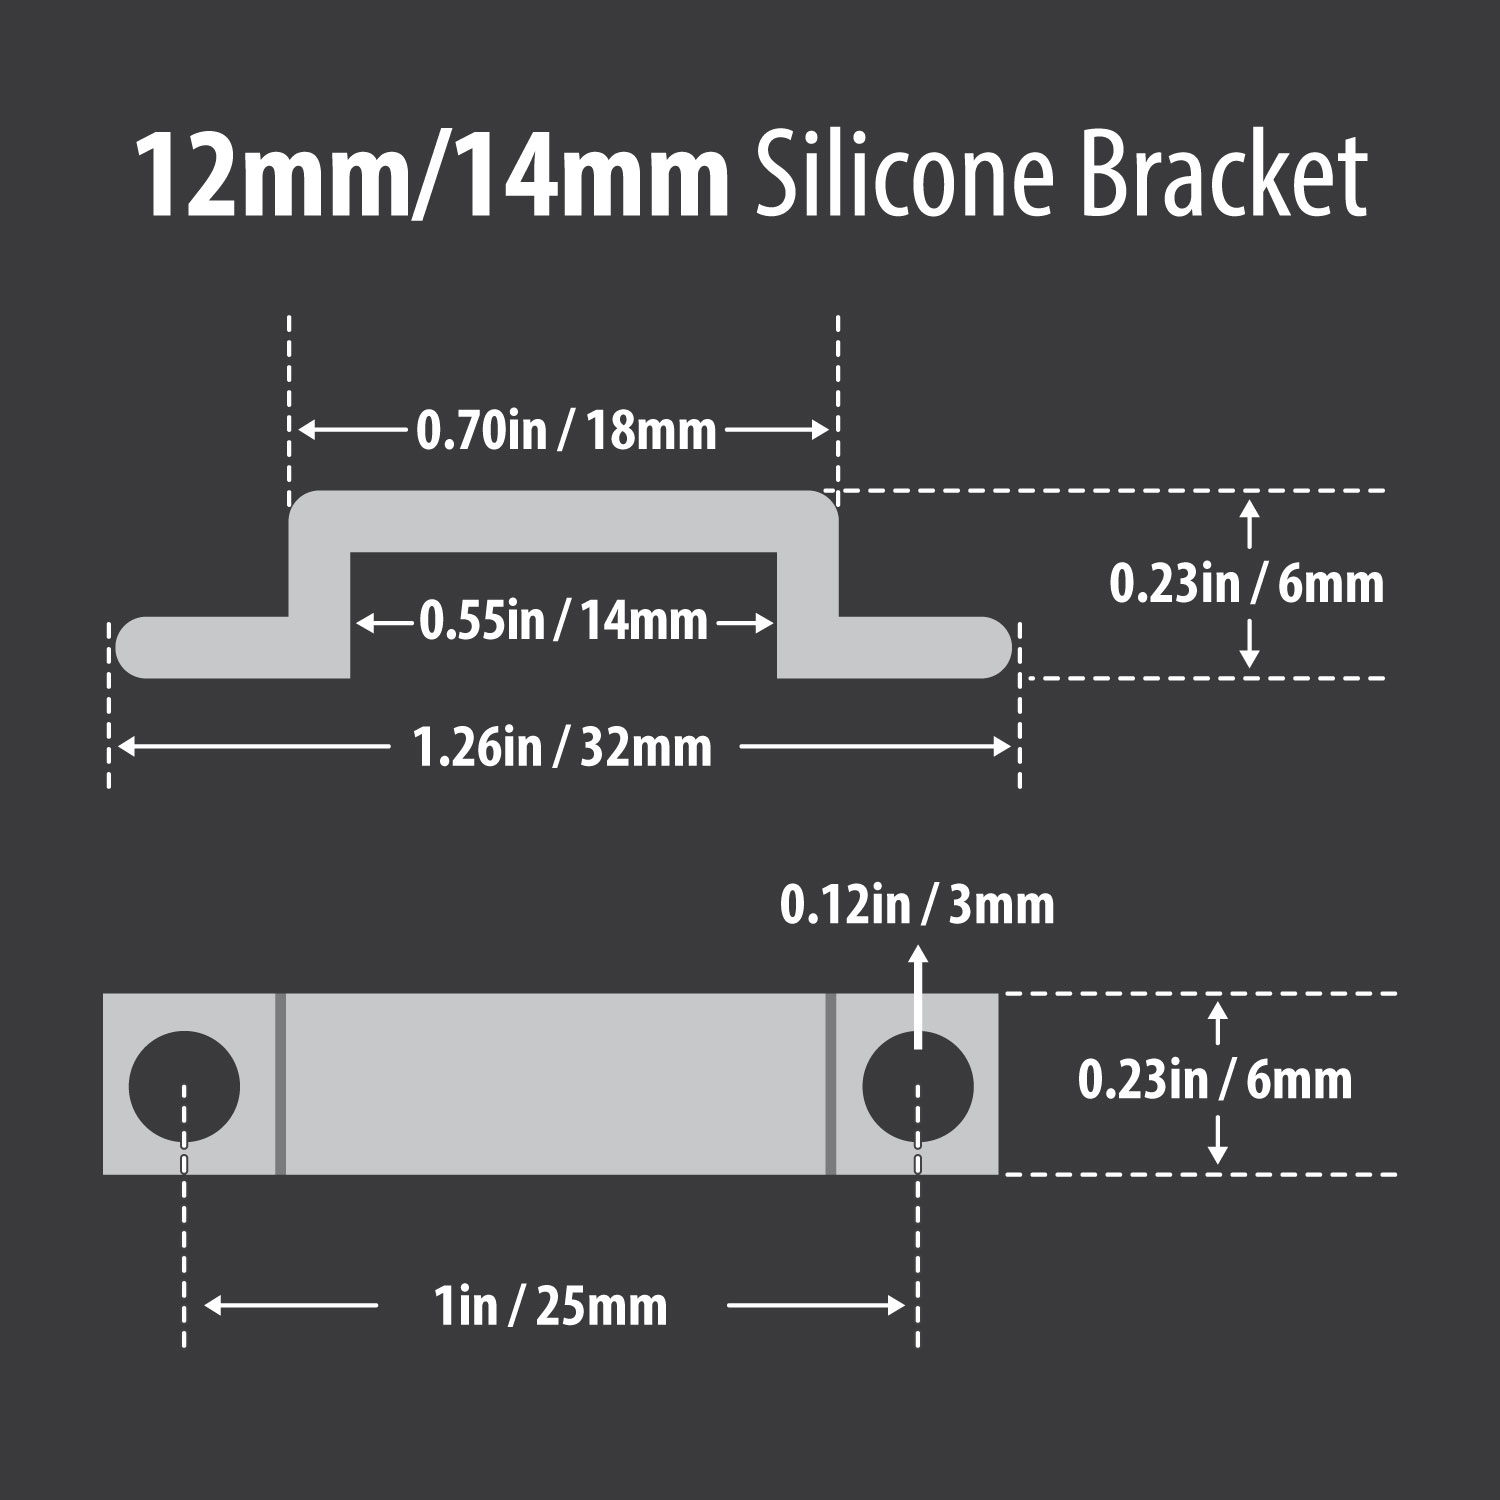 12mm/14mm Silicone Bracket for Waterproof LED Strip